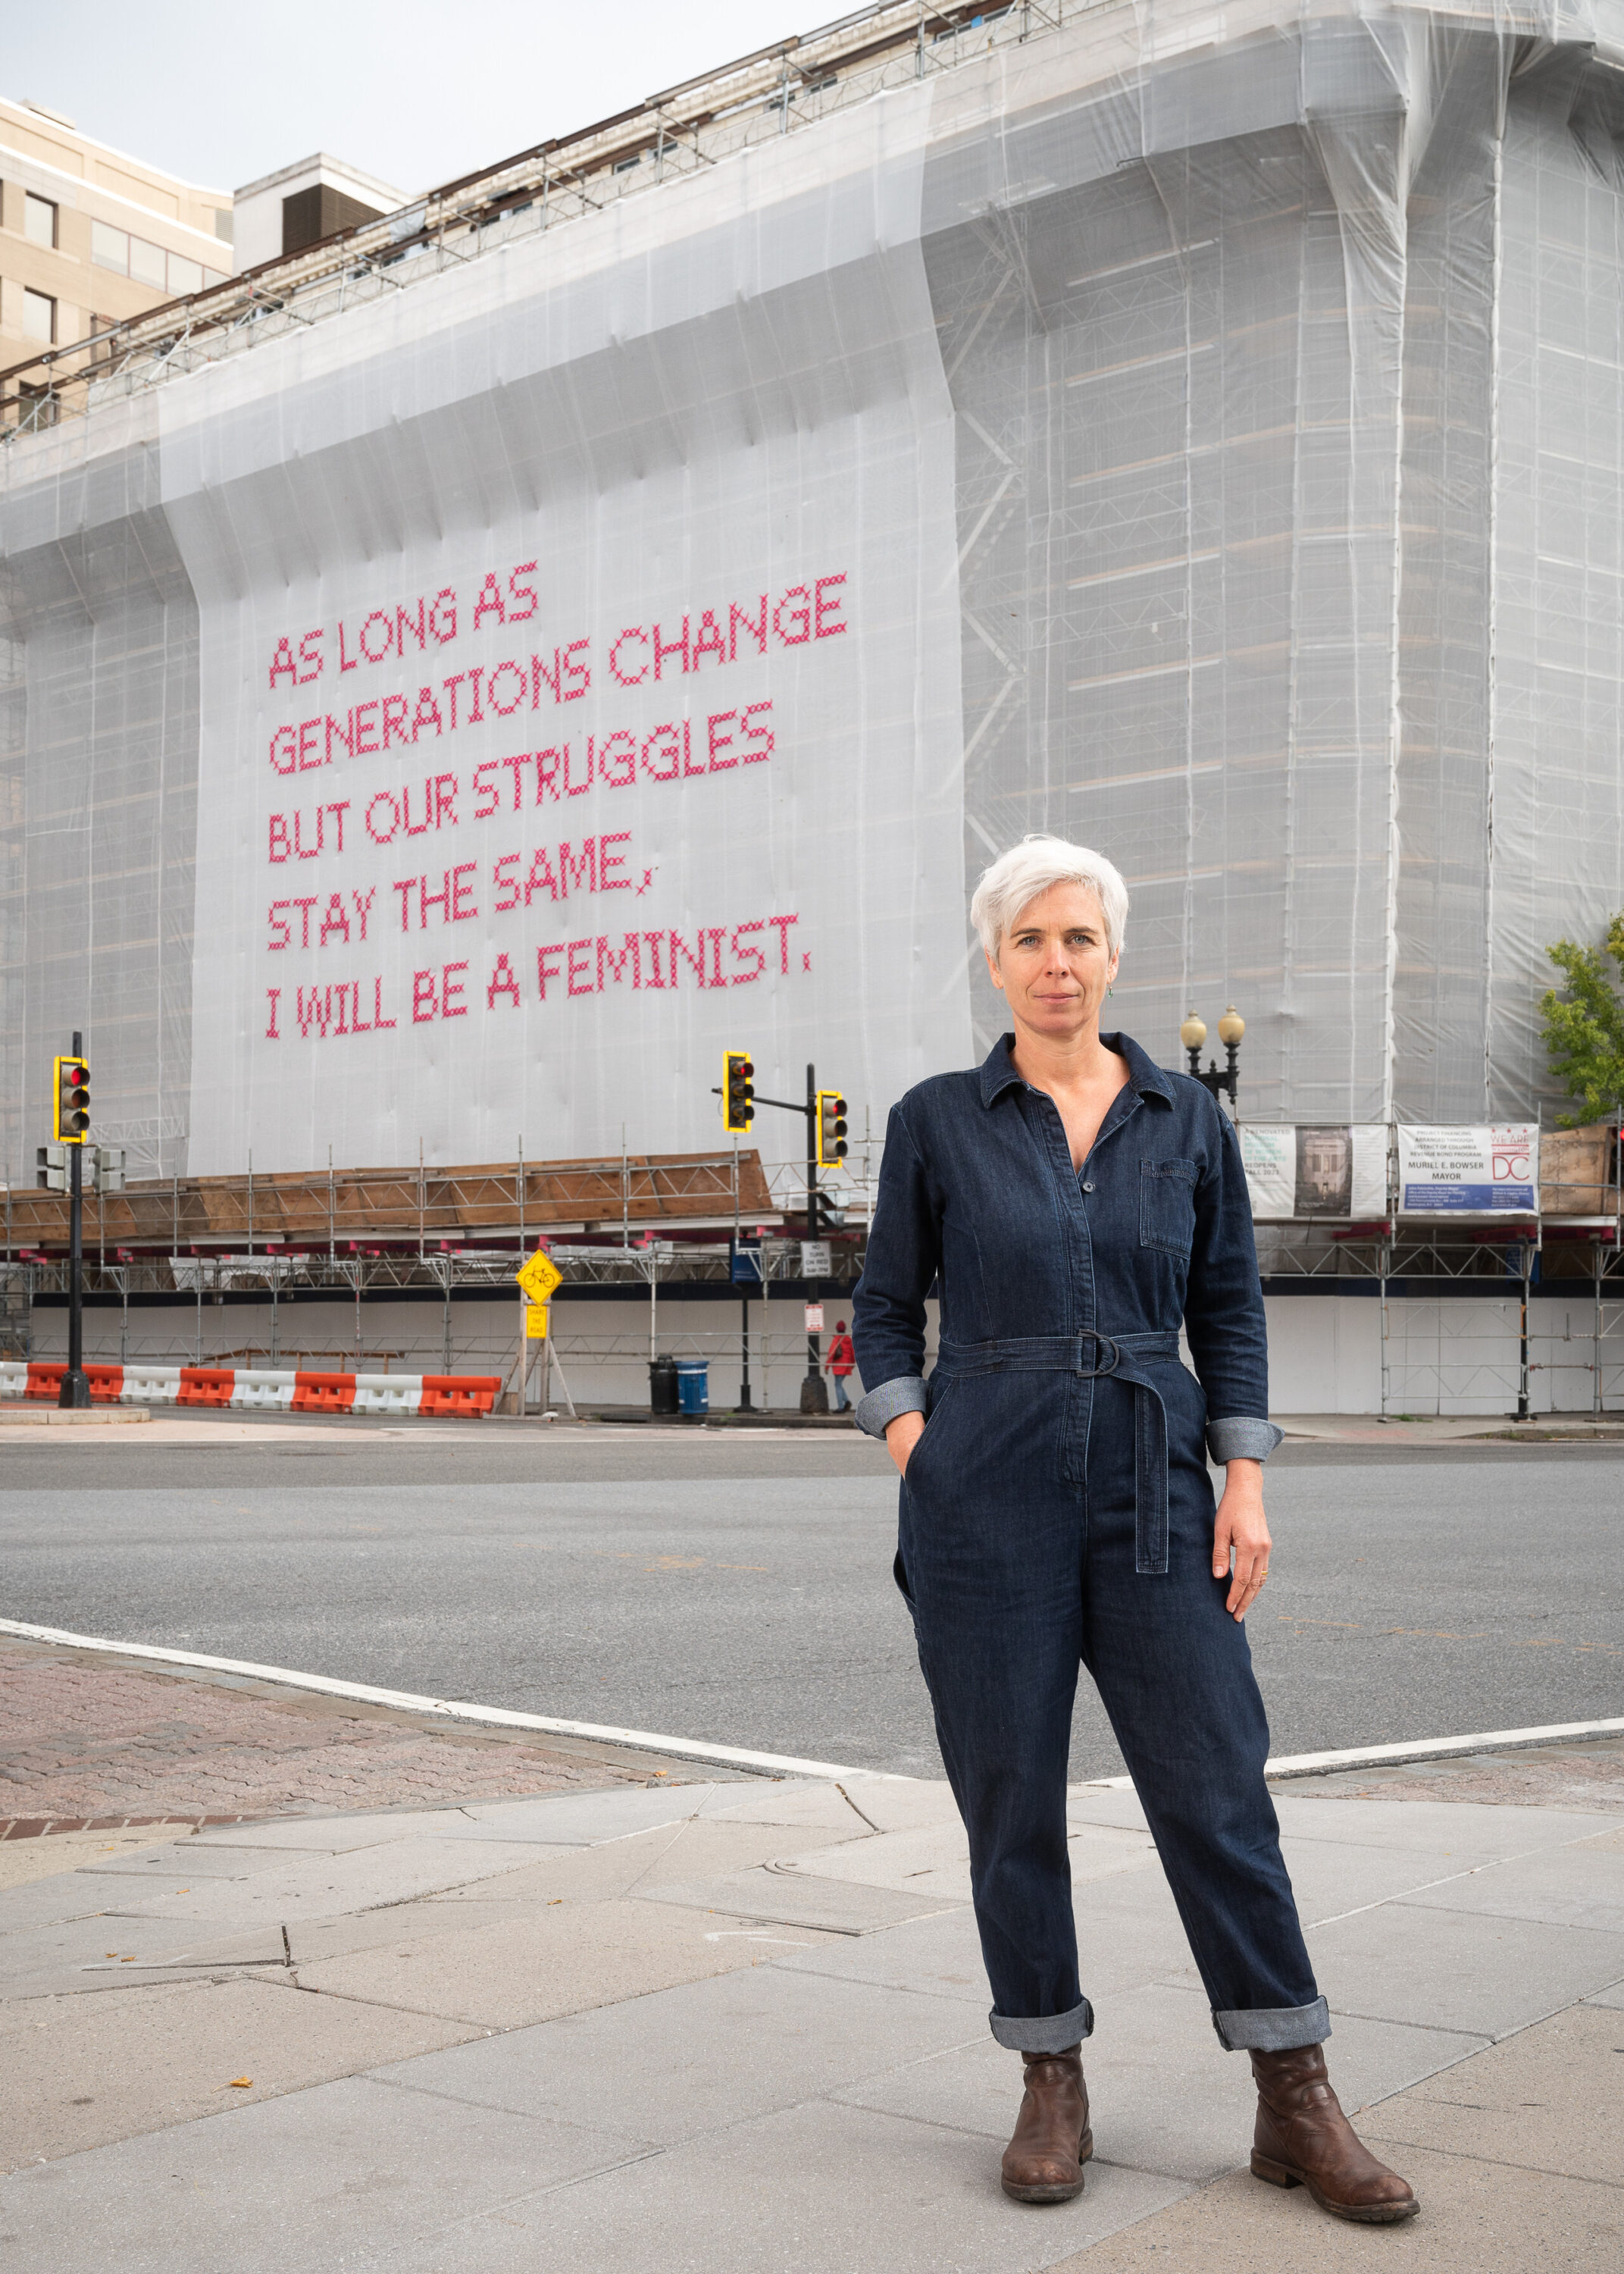 A light-skinned woman with short white hair stands in front of a building whose façade is covered in a white mesh artwork with bright pink cross-stitched letters that say "As long as generations change but our struggles stay the same, I will be a feminist."